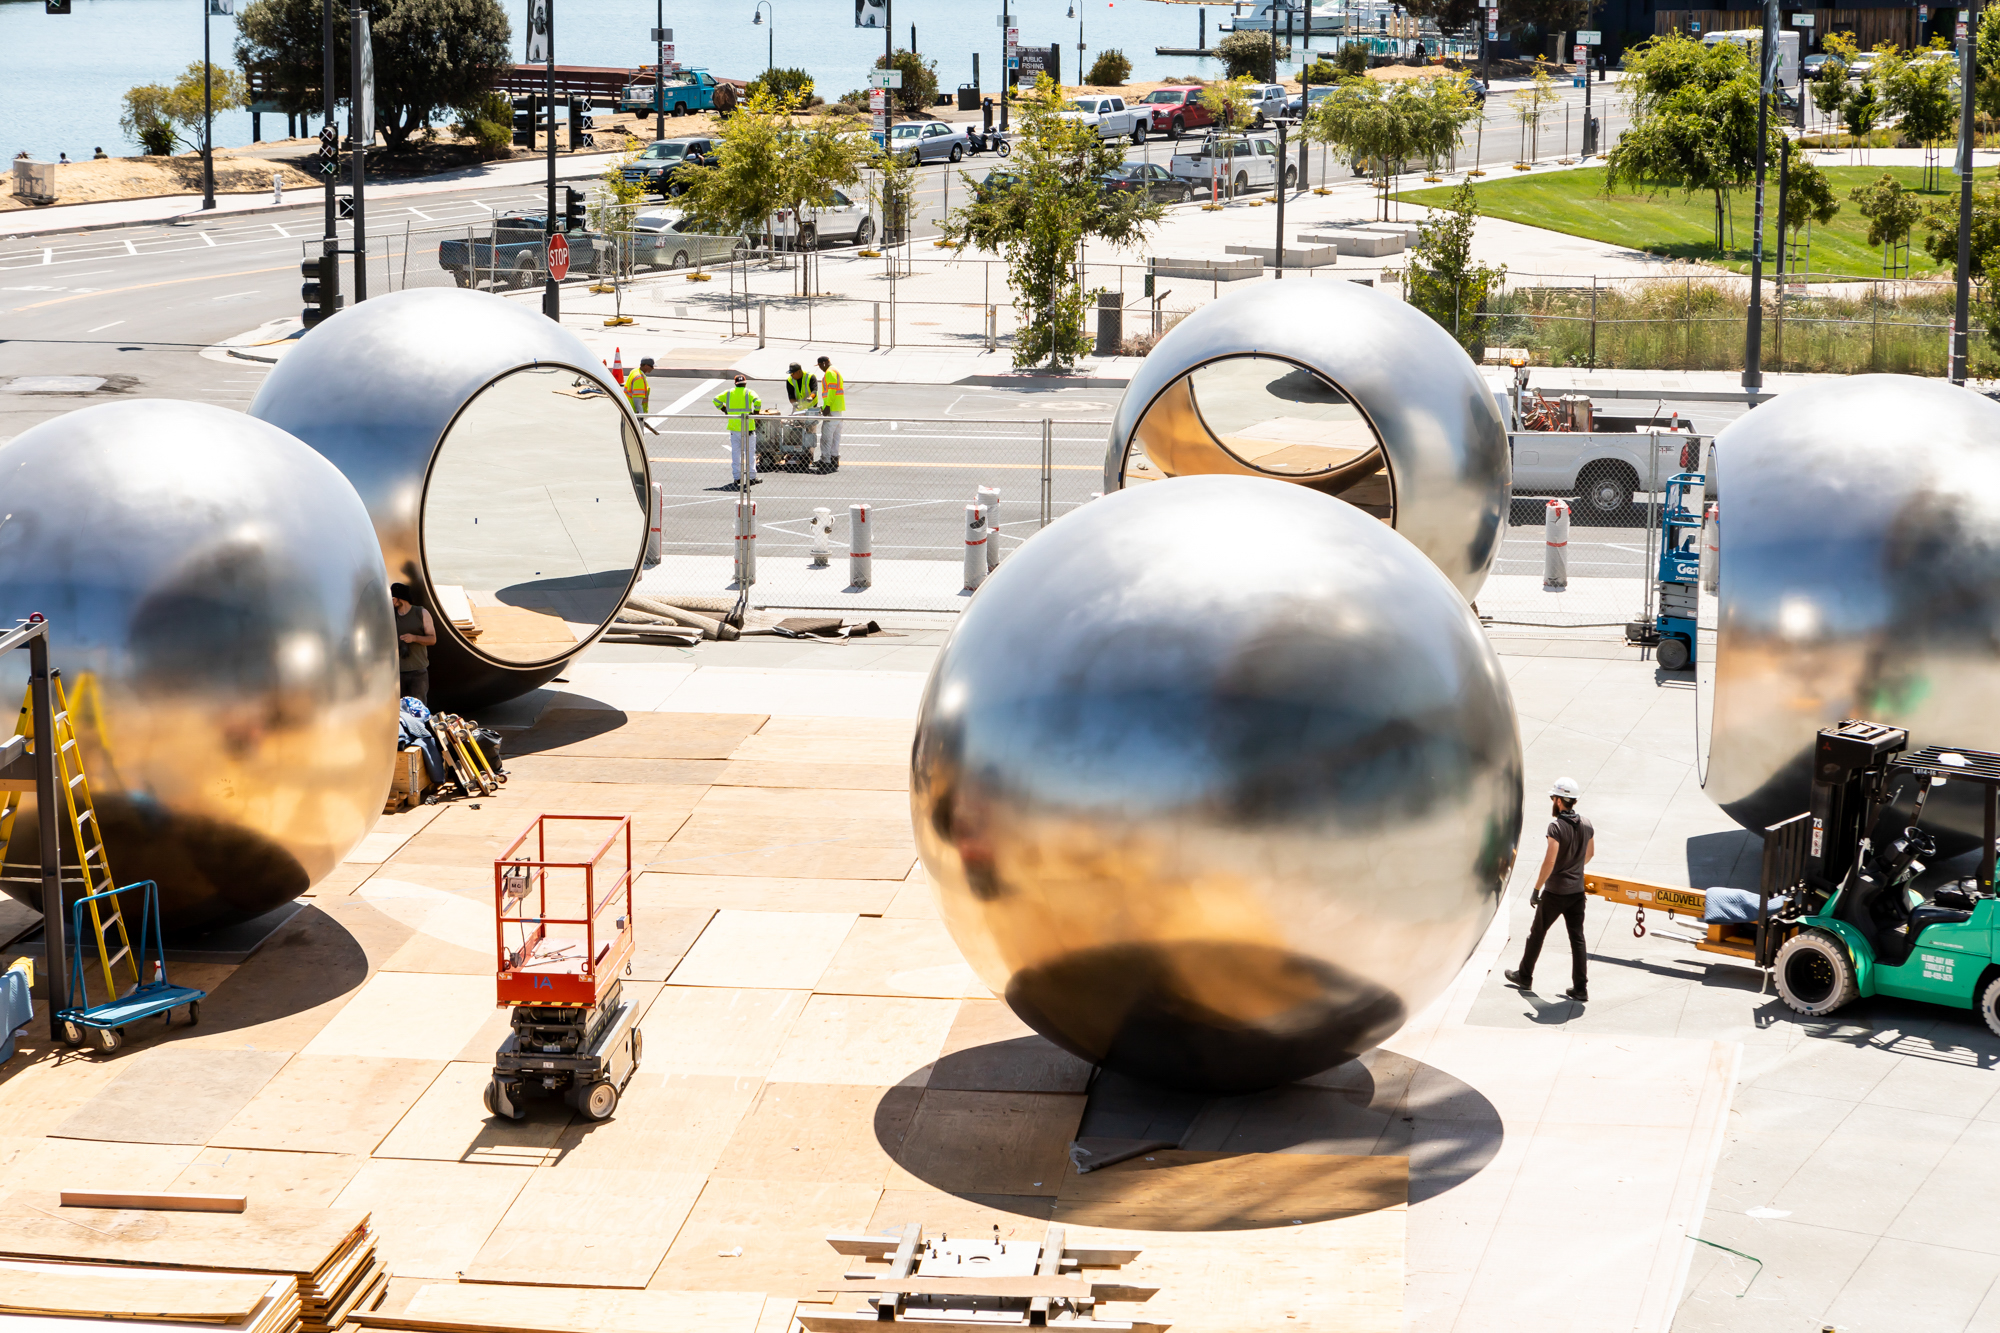 Five large steel globe-like structures in a circle, with mirrored inlays facing each other. It’s still under construction.